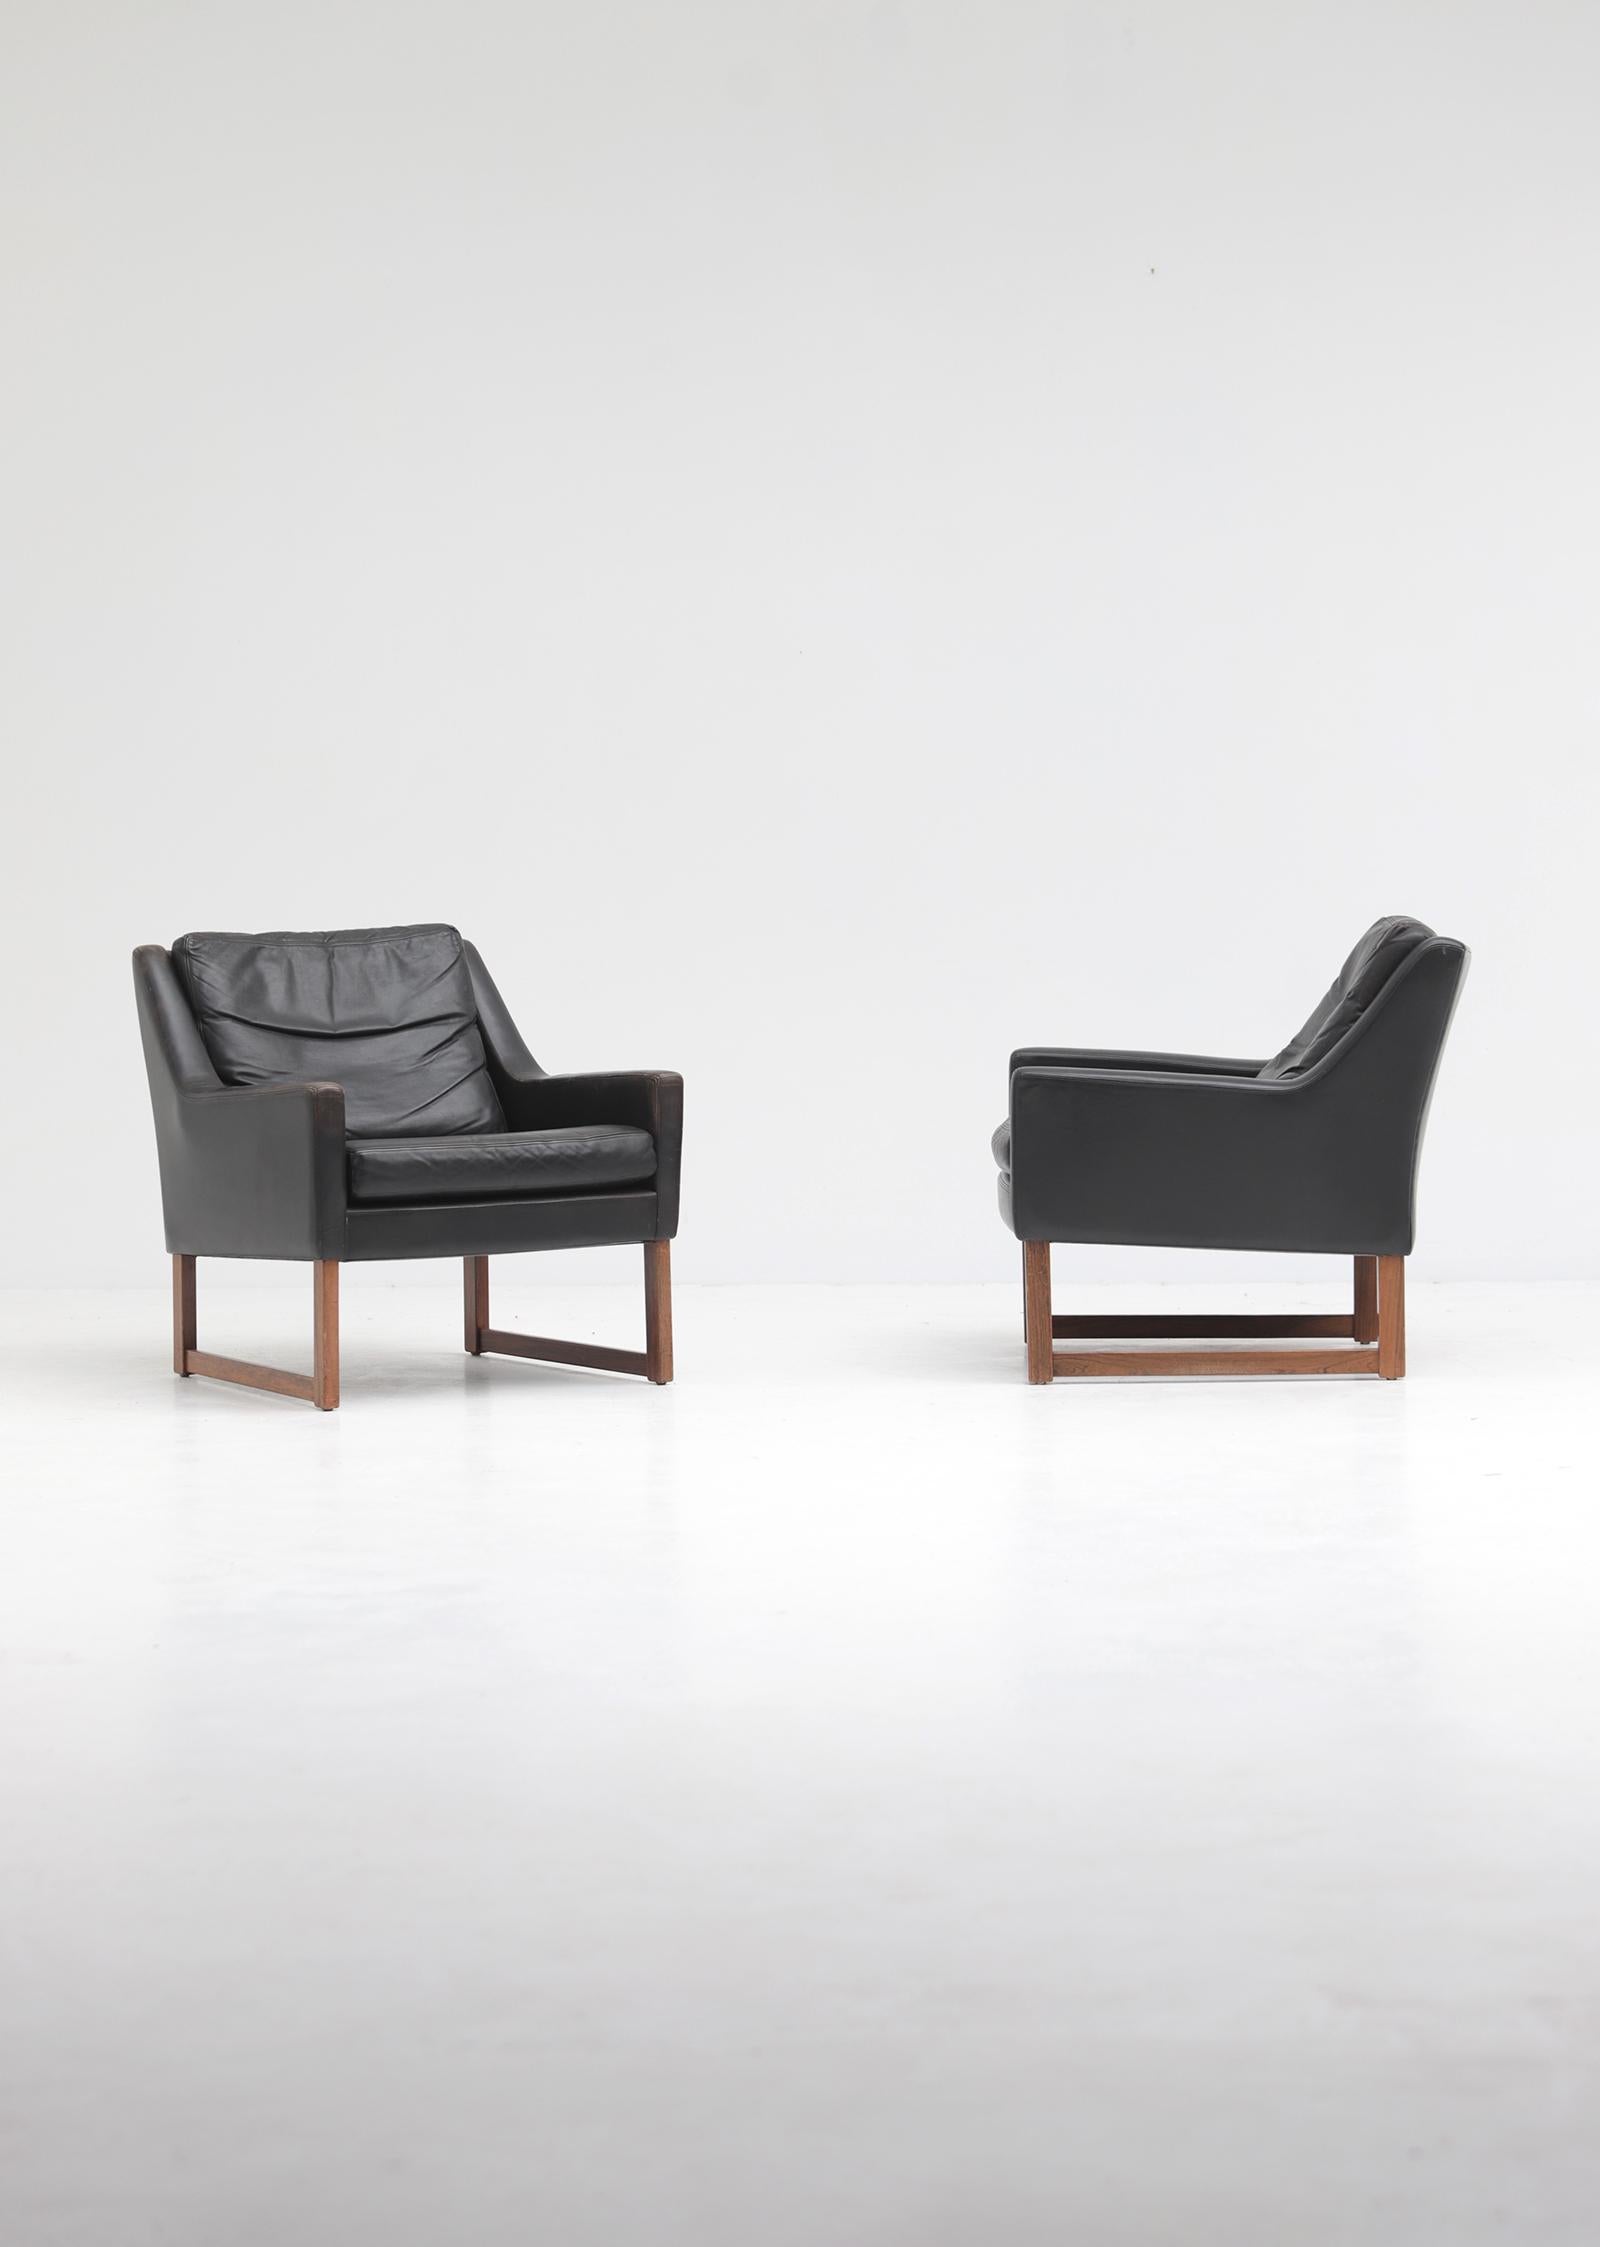 Pair of leather armchairs designed in the 1960's by Rudolf Bernd Glatzel for Kill International, Germany. Both chairs have a wooden frame, upholstered with a black aniline quality leather. The chairs have loose cushions that are feather filled and